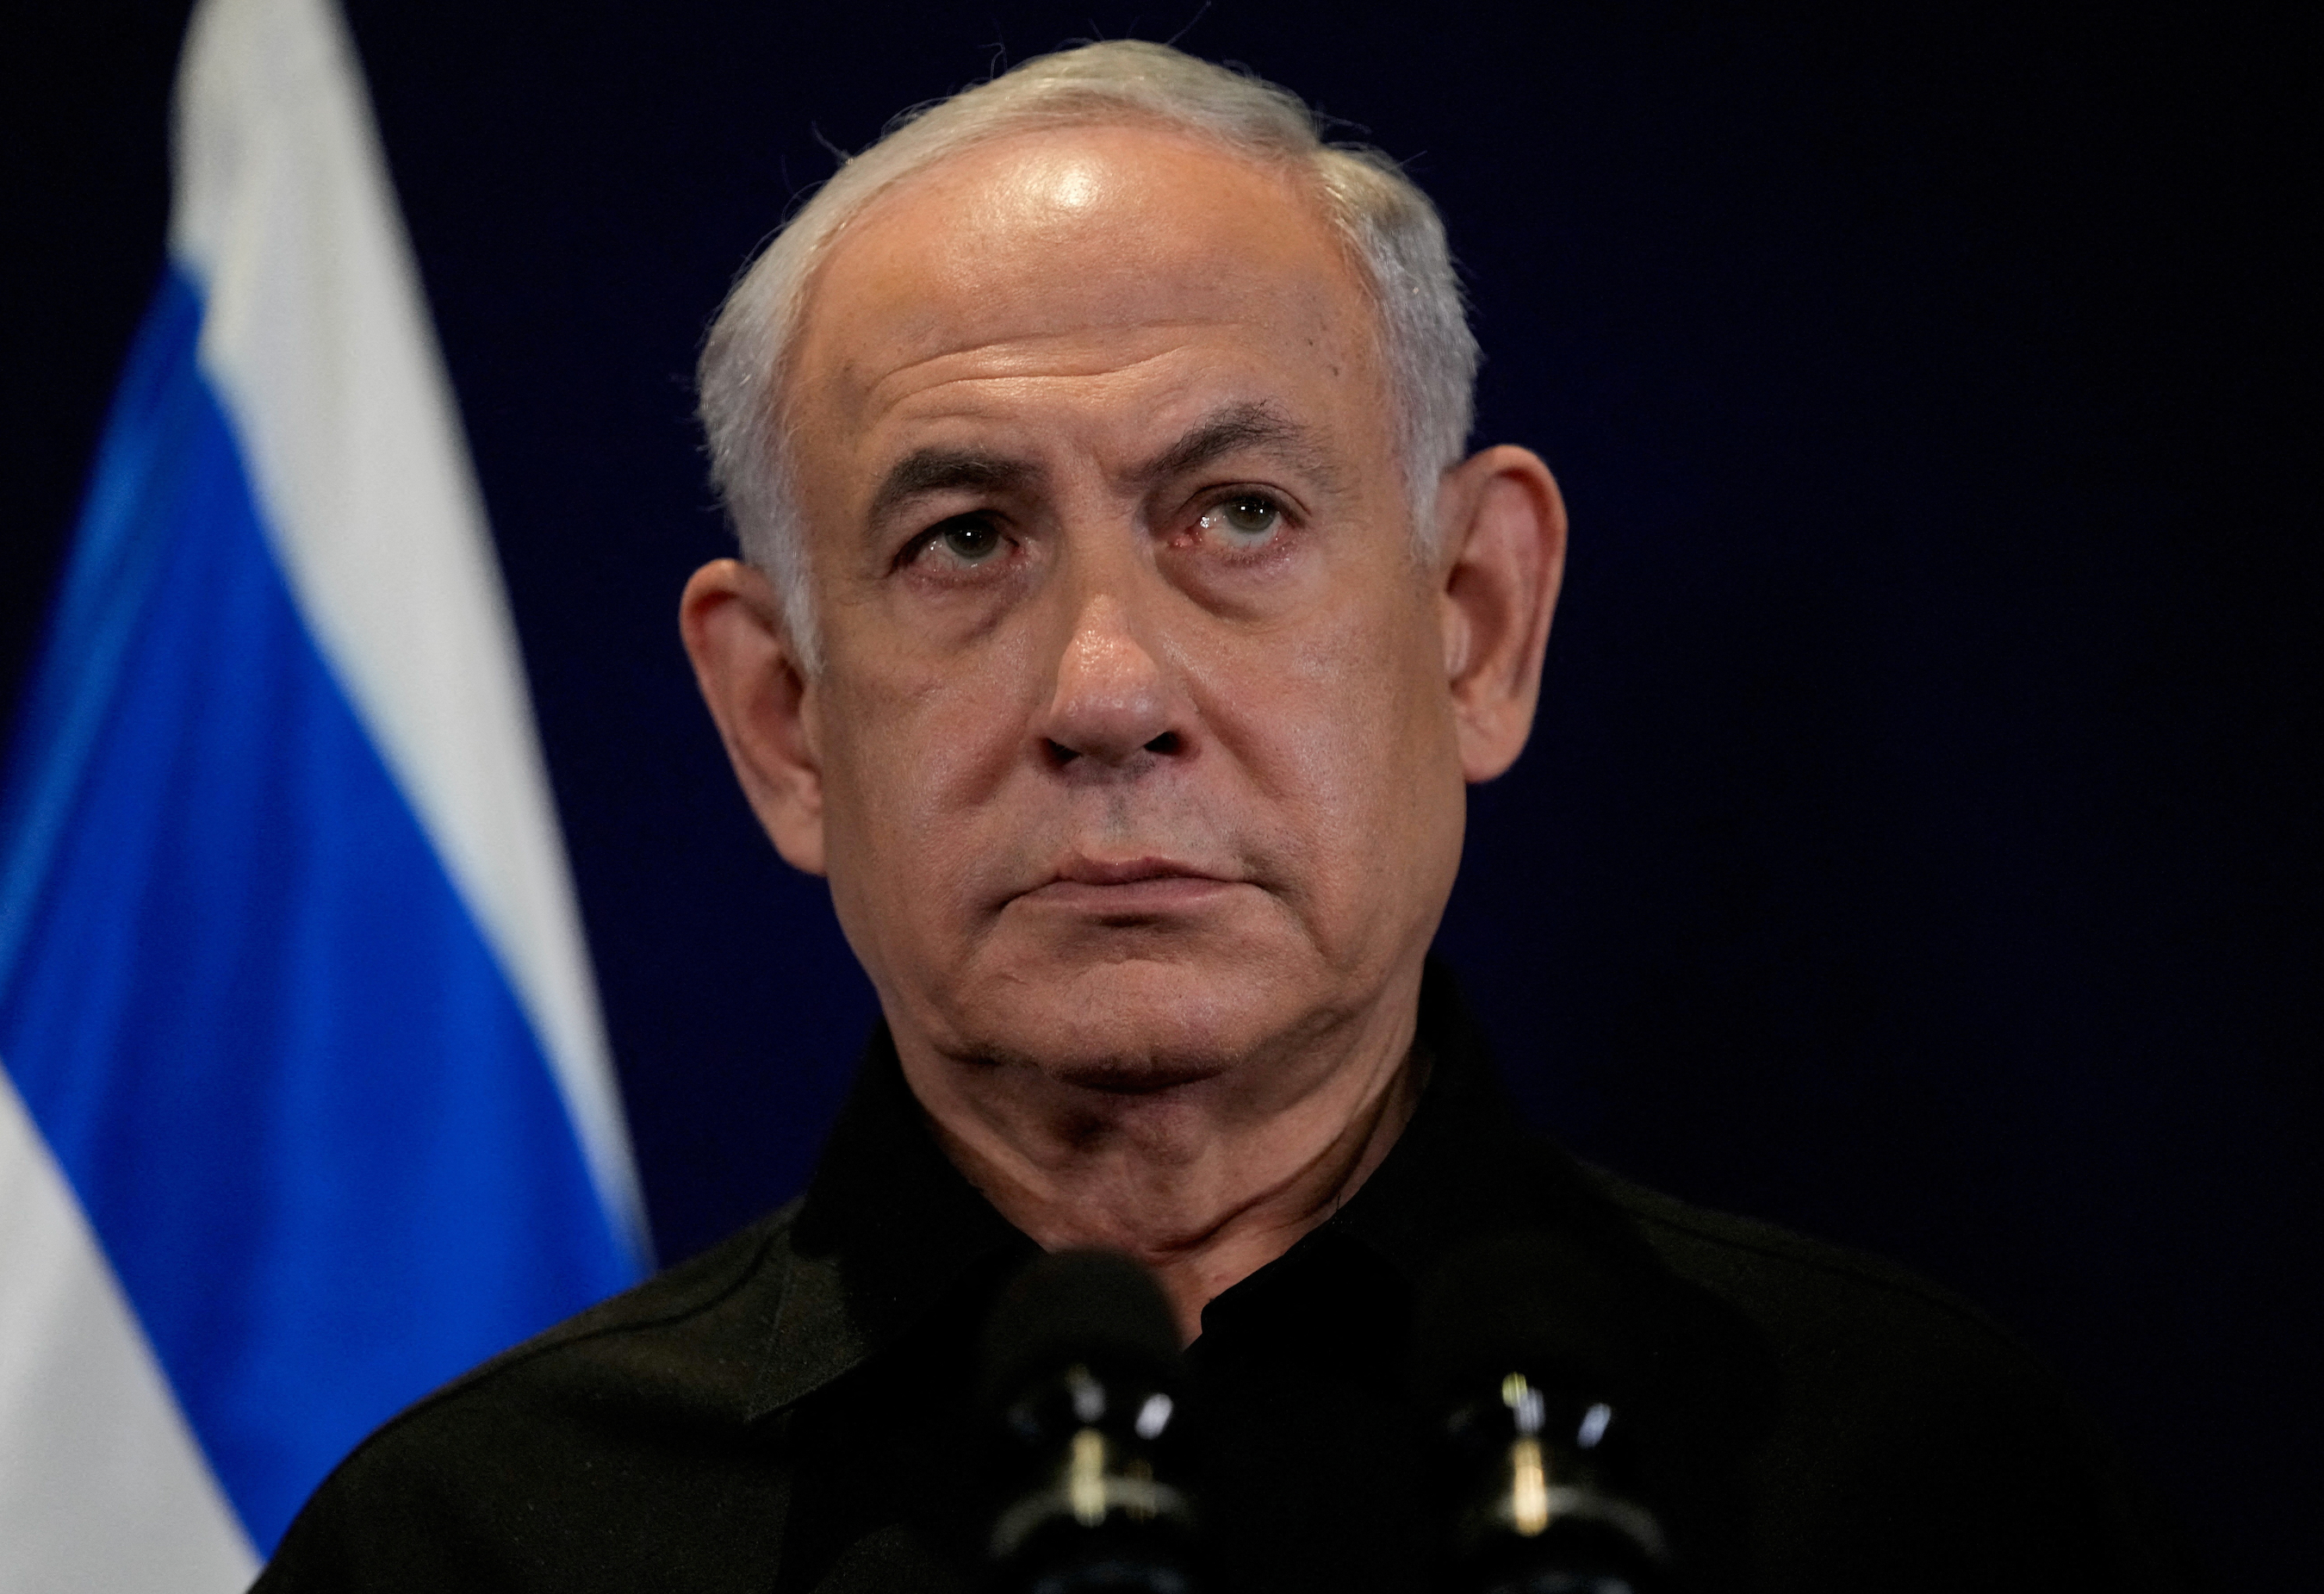 Most Israelis blame Netanyahu for failing to prevent Hamas attack, poll shows